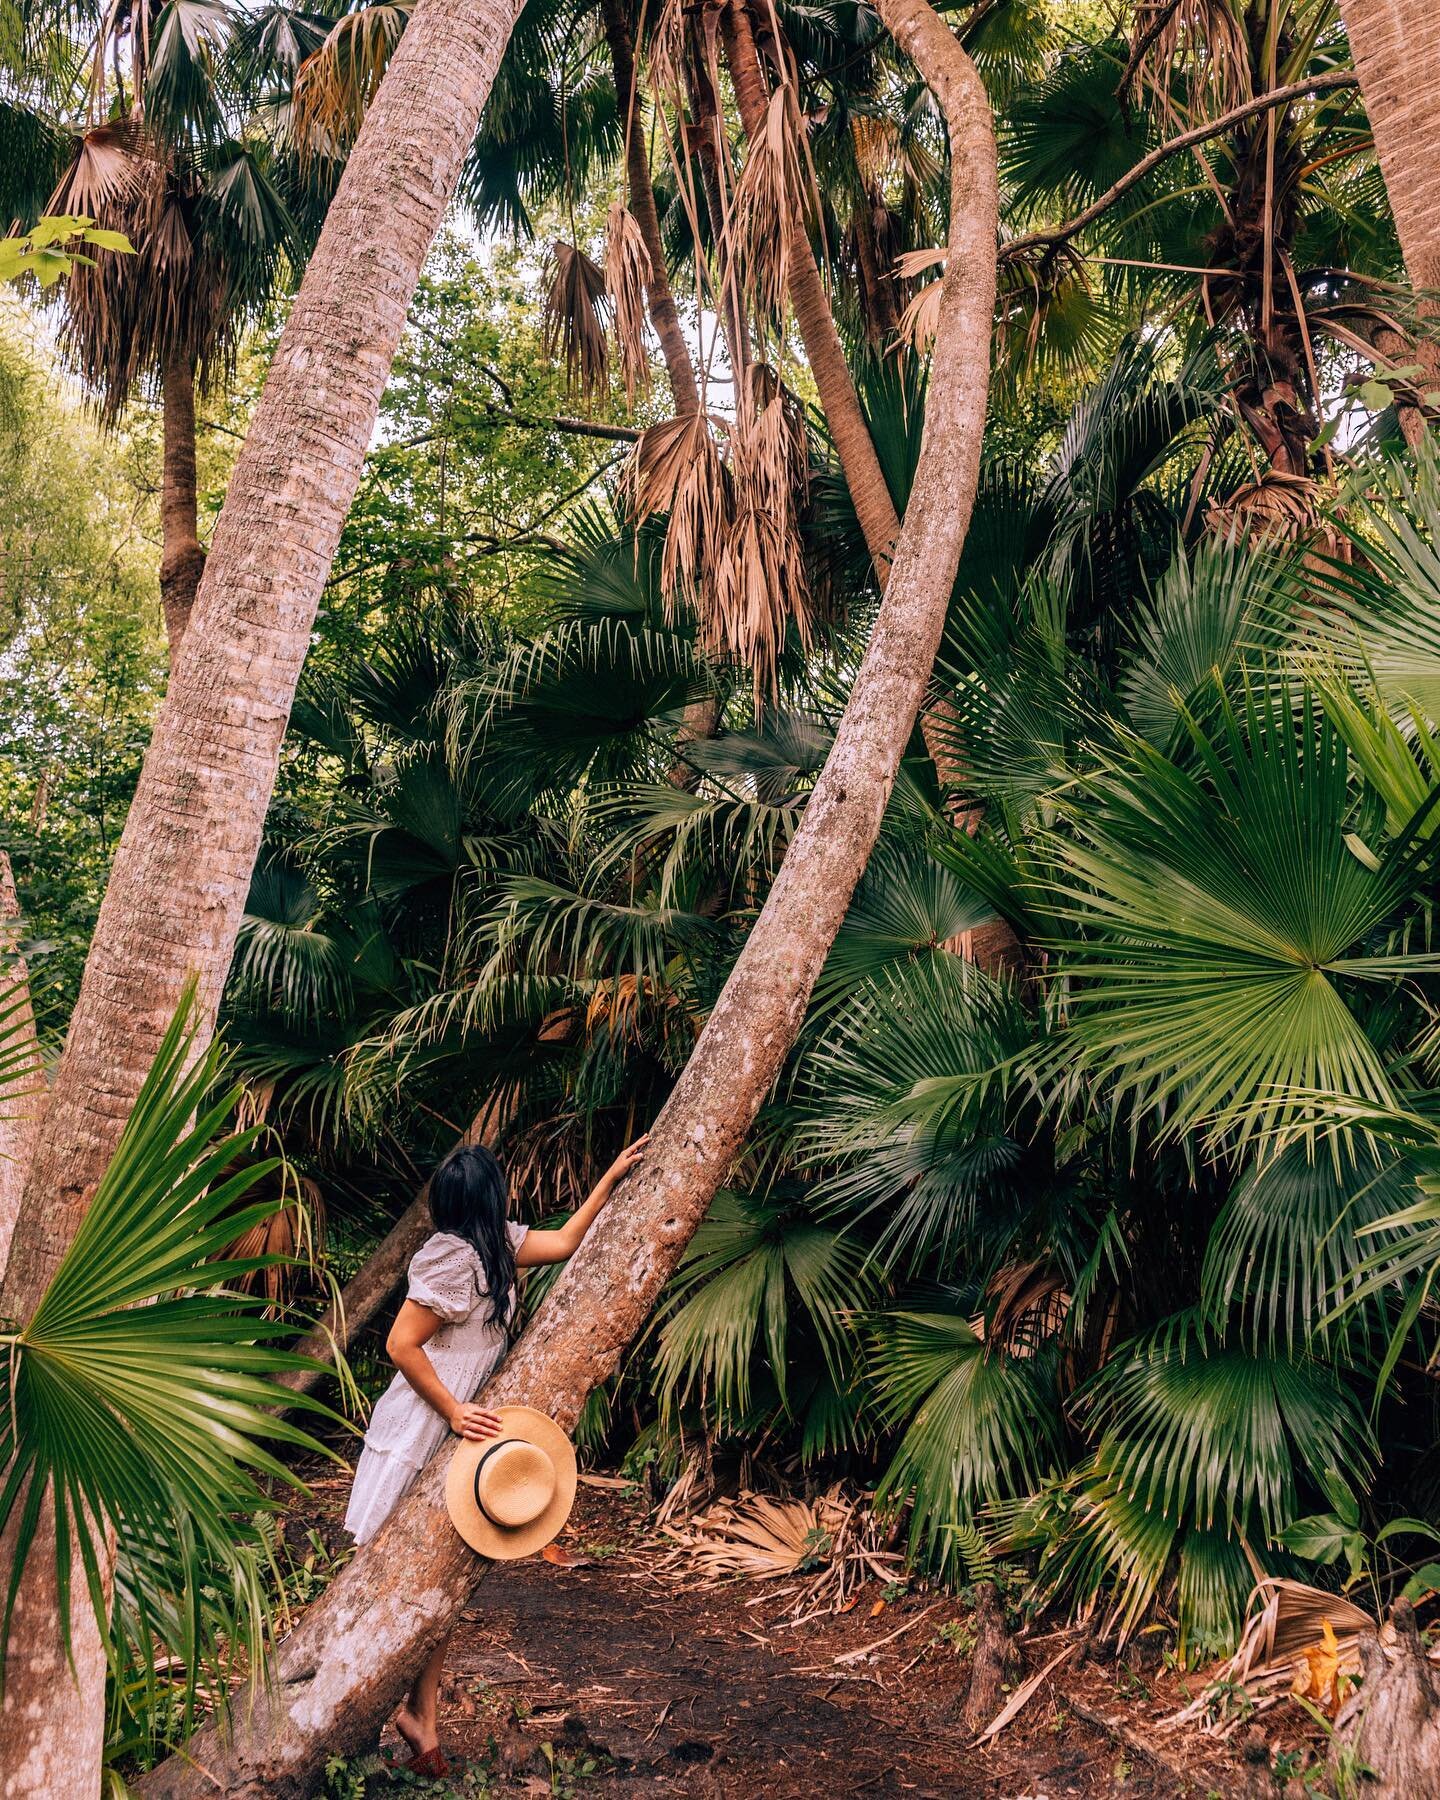 WELCOME TO THE (ORLANDO) JUNGLE

Tucked away in the Winter Park neighborhood of Orlando is the Mead Botanical Garden. Here are 5 reasons why you need to visit: 

🌿 Entrance to the garden is free so it's totally budget friendly

🌿 There are 48 acres